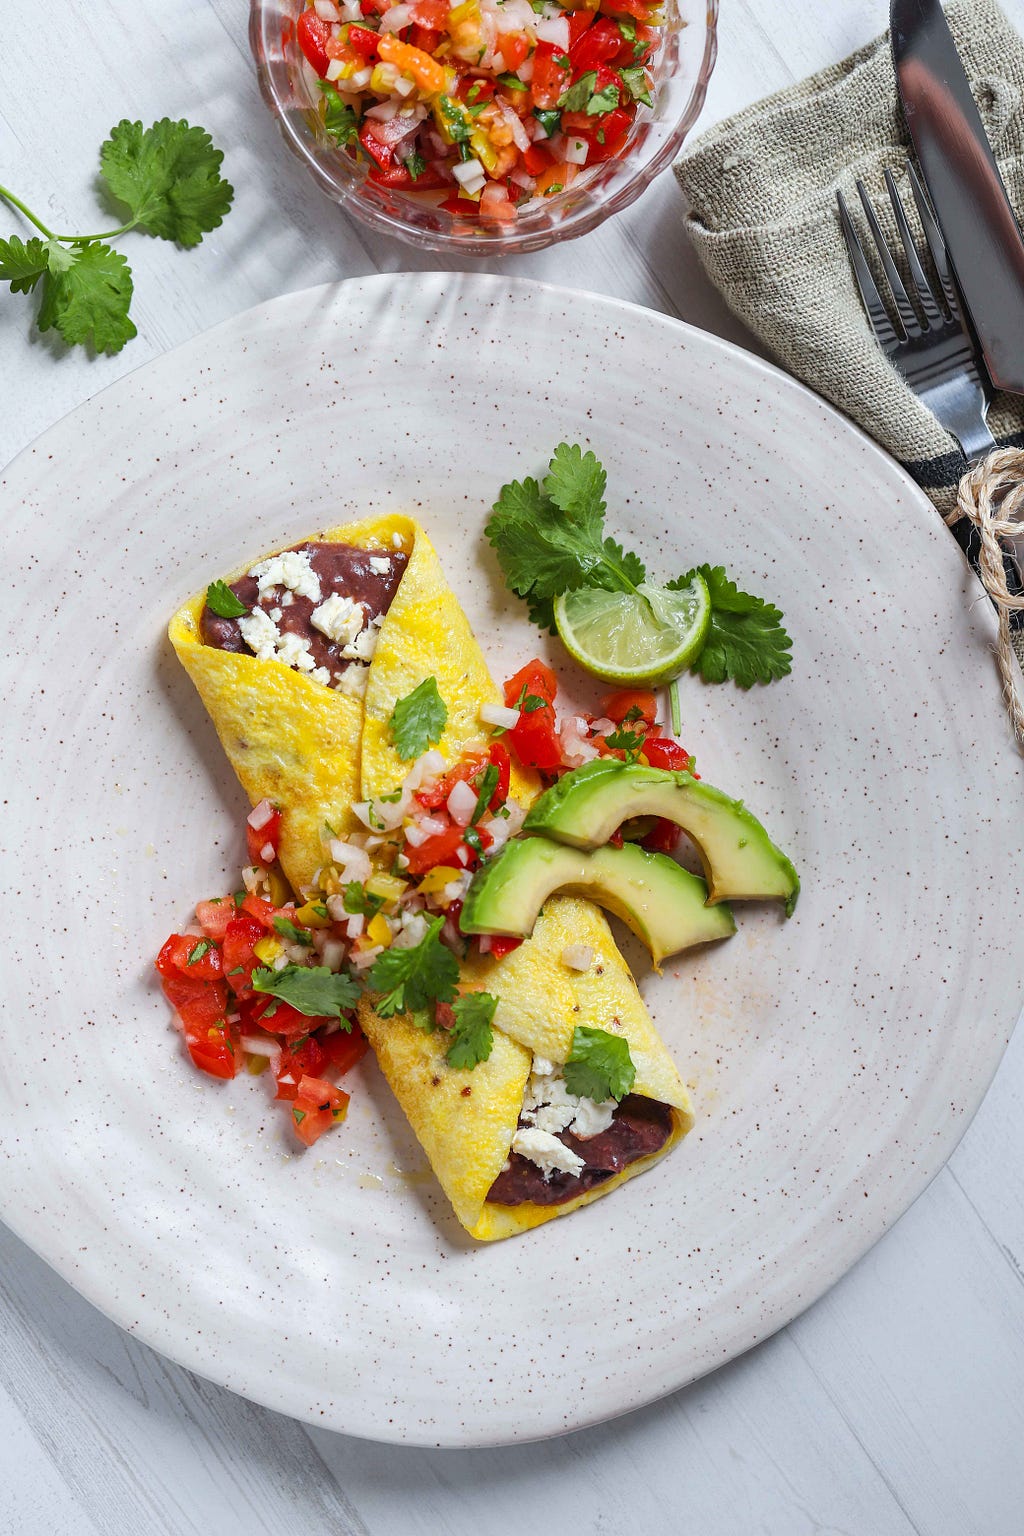 black bean omelet garnished with salsa and avocado slices by FIT & NU™.